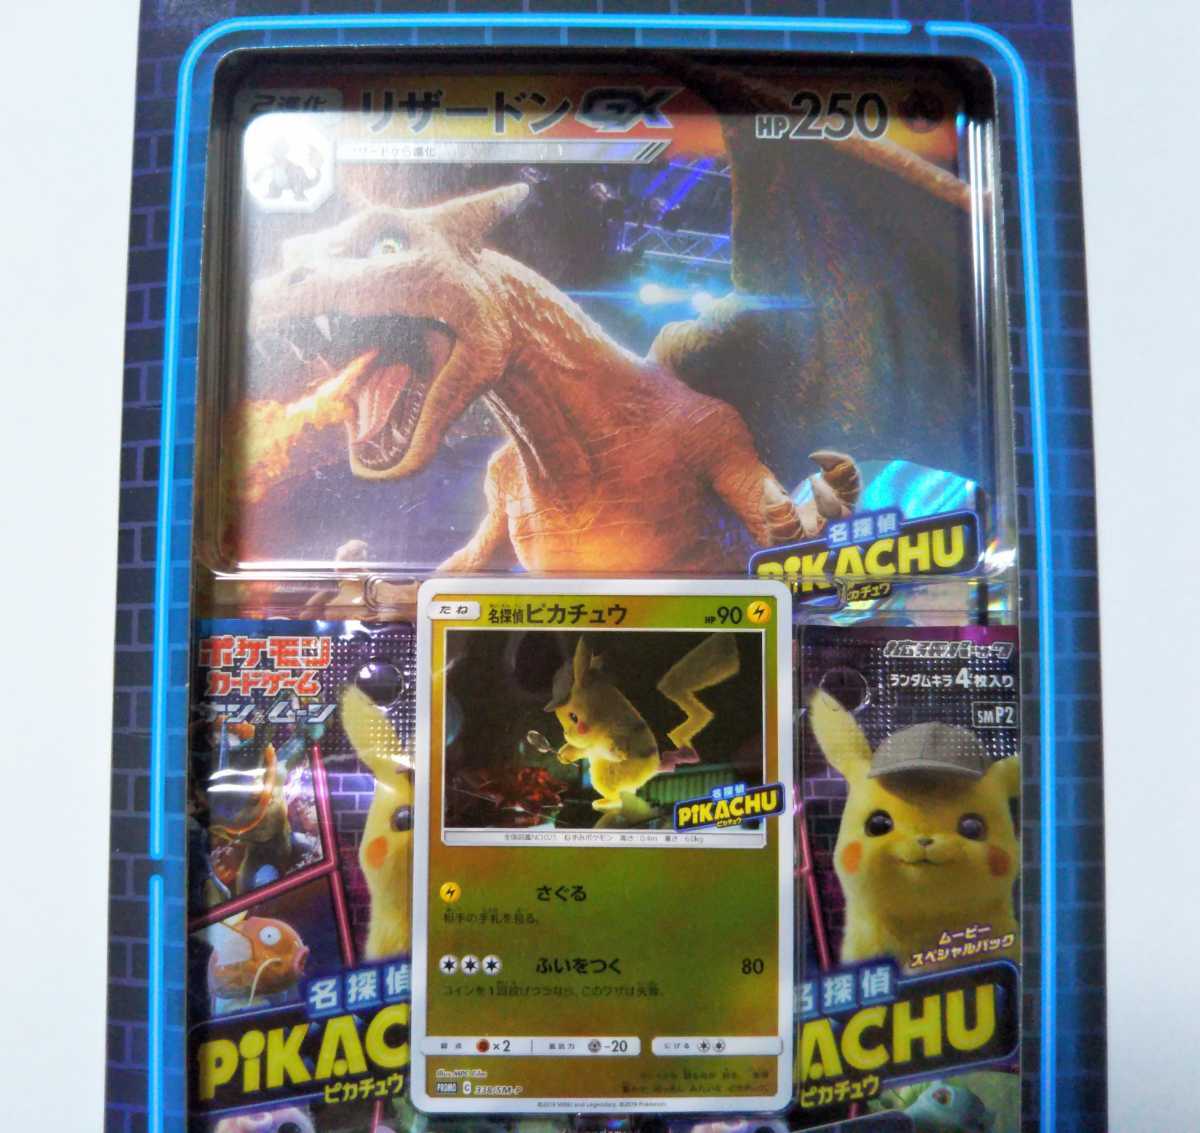  free shipping * Pokemon card Loppi limitation special jumbo card pack name .. Pikachu Lizard nGXver. promo card trading card new goods unused 